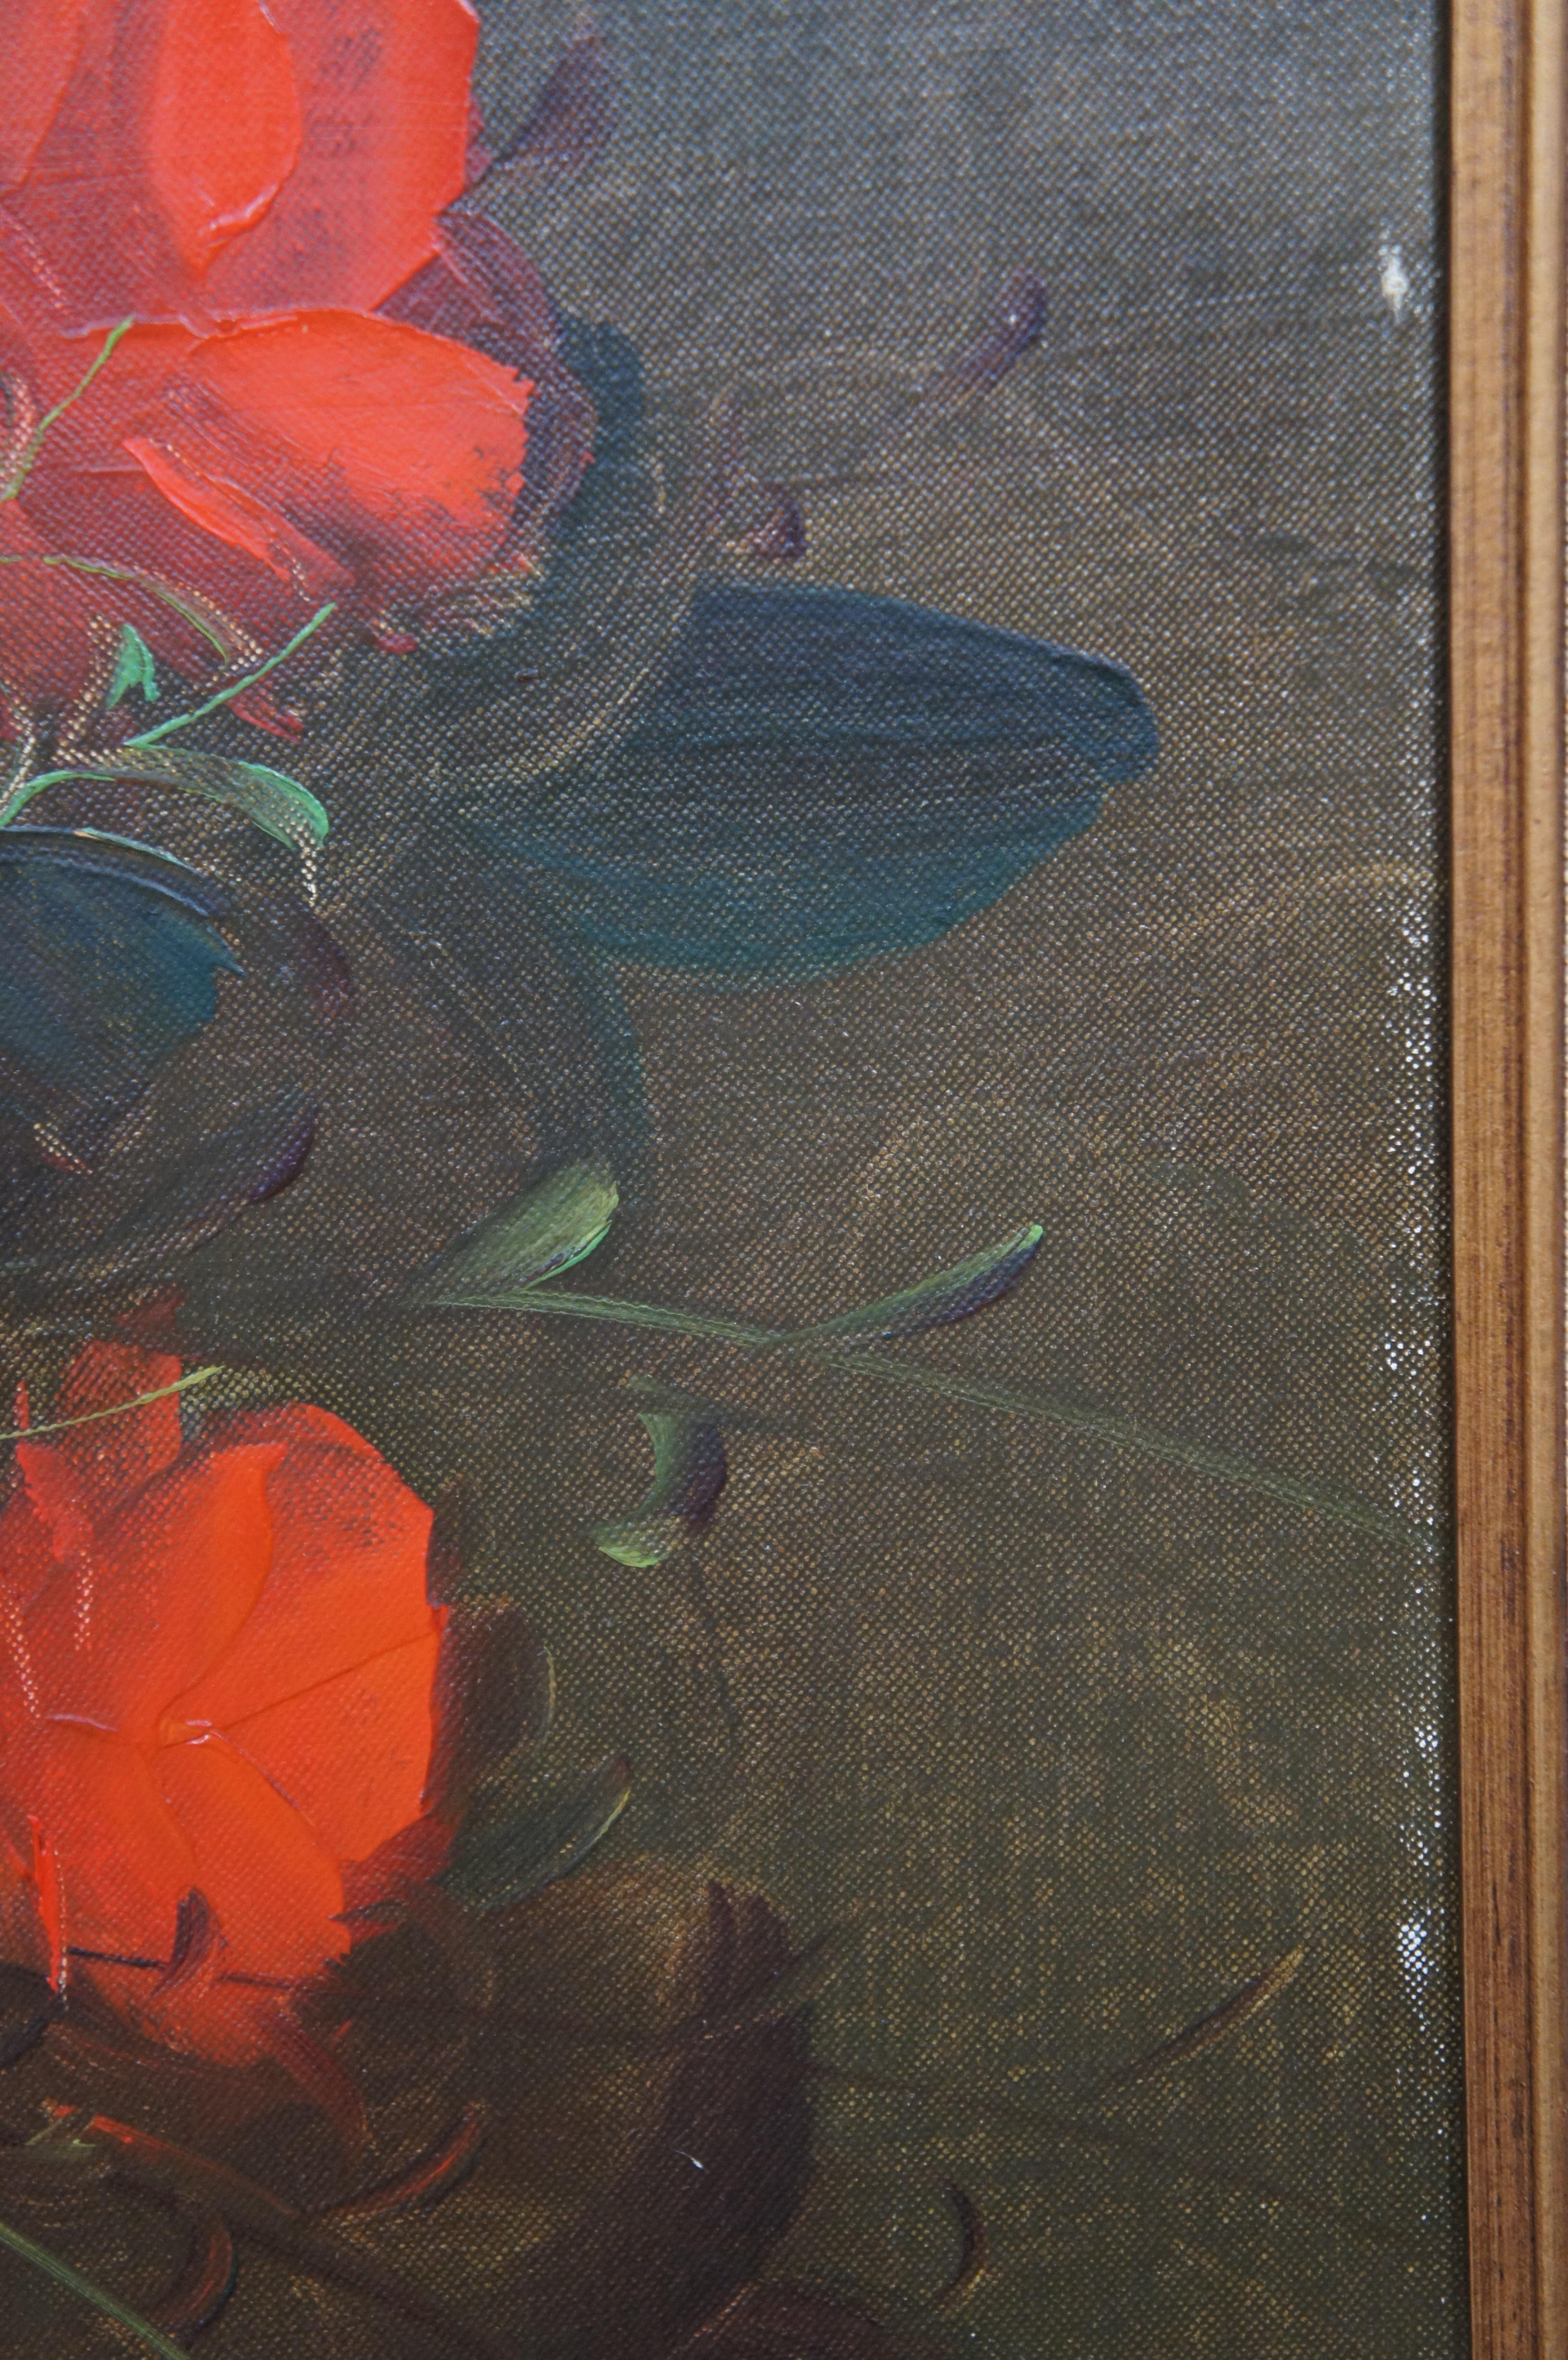 Vintage Suzanne Floral Still Life Oil Painting on Canvas Orange Rose Bouquet In Good Condition For Sale In Dayton, OH